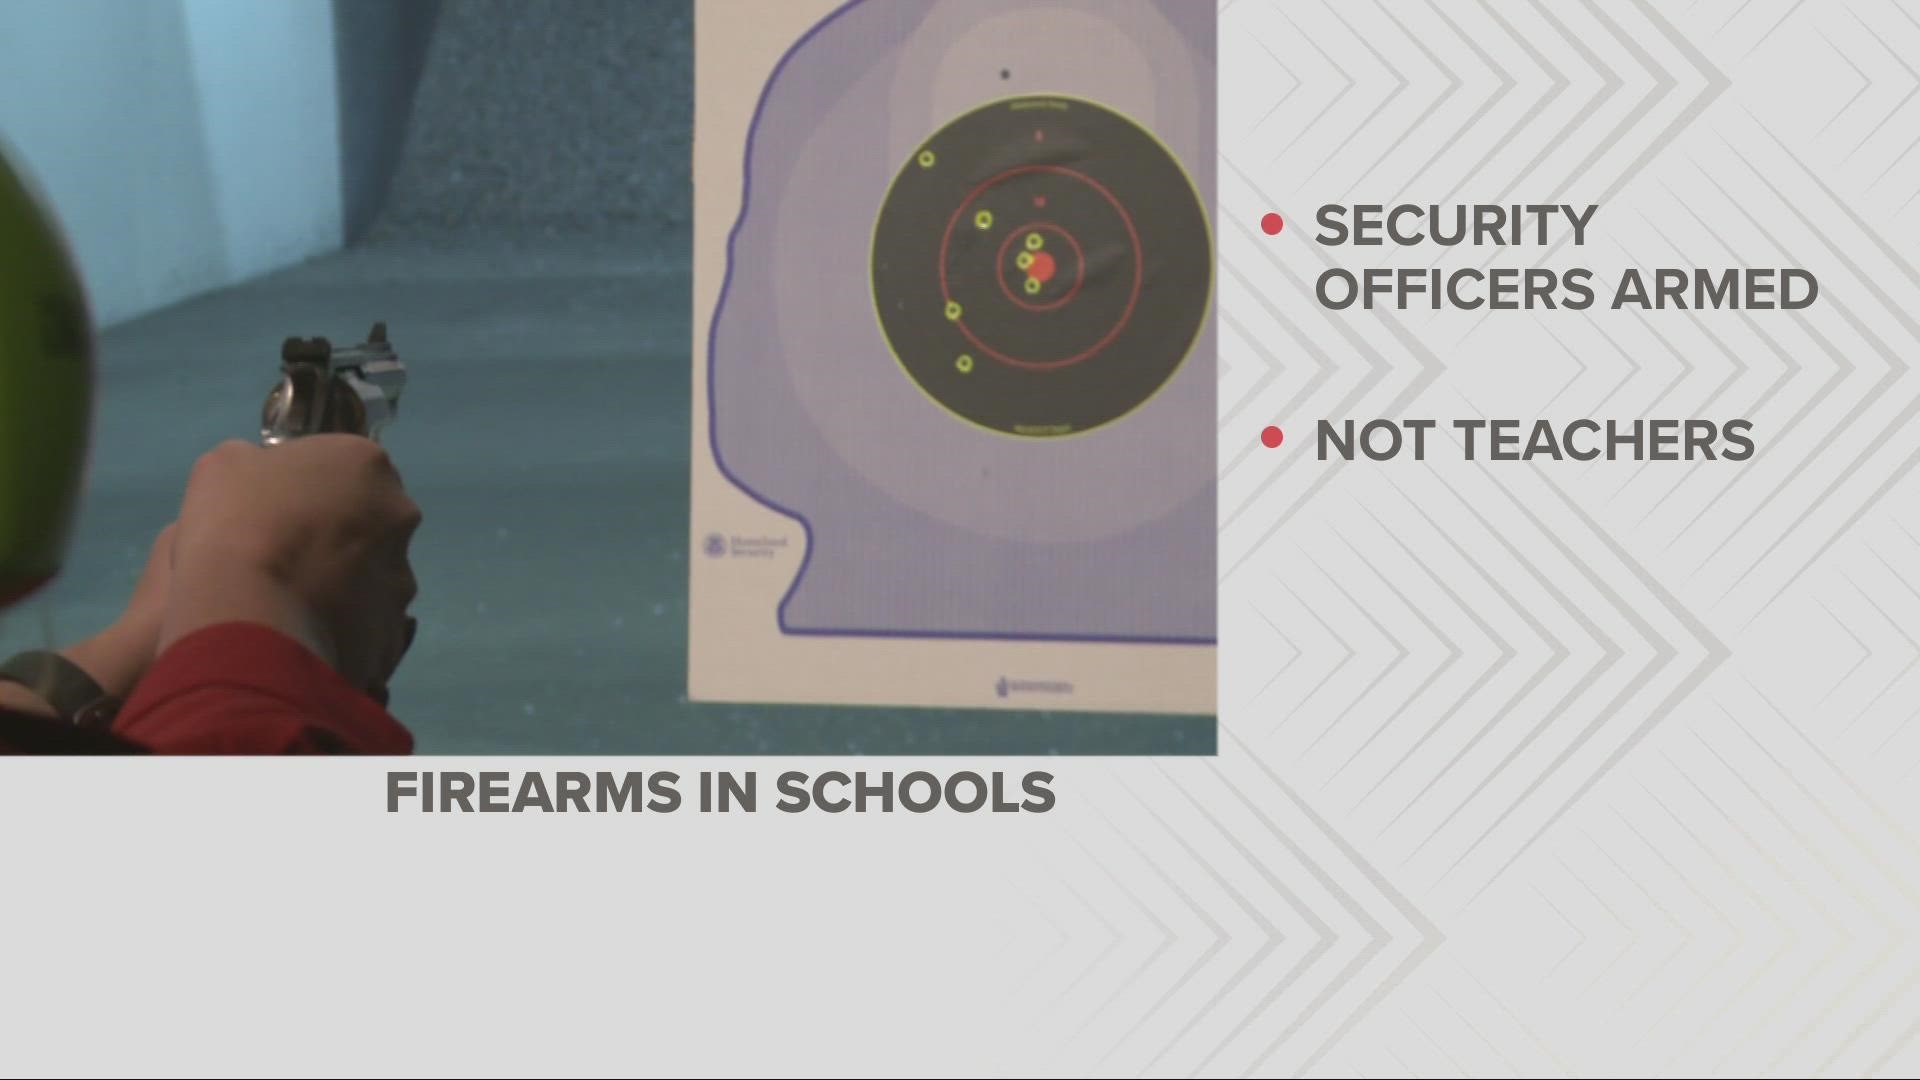 CMSD says 'the presence of undertrained or improperly trained persons armed with firearms in our schools would create a dangerous environment.'